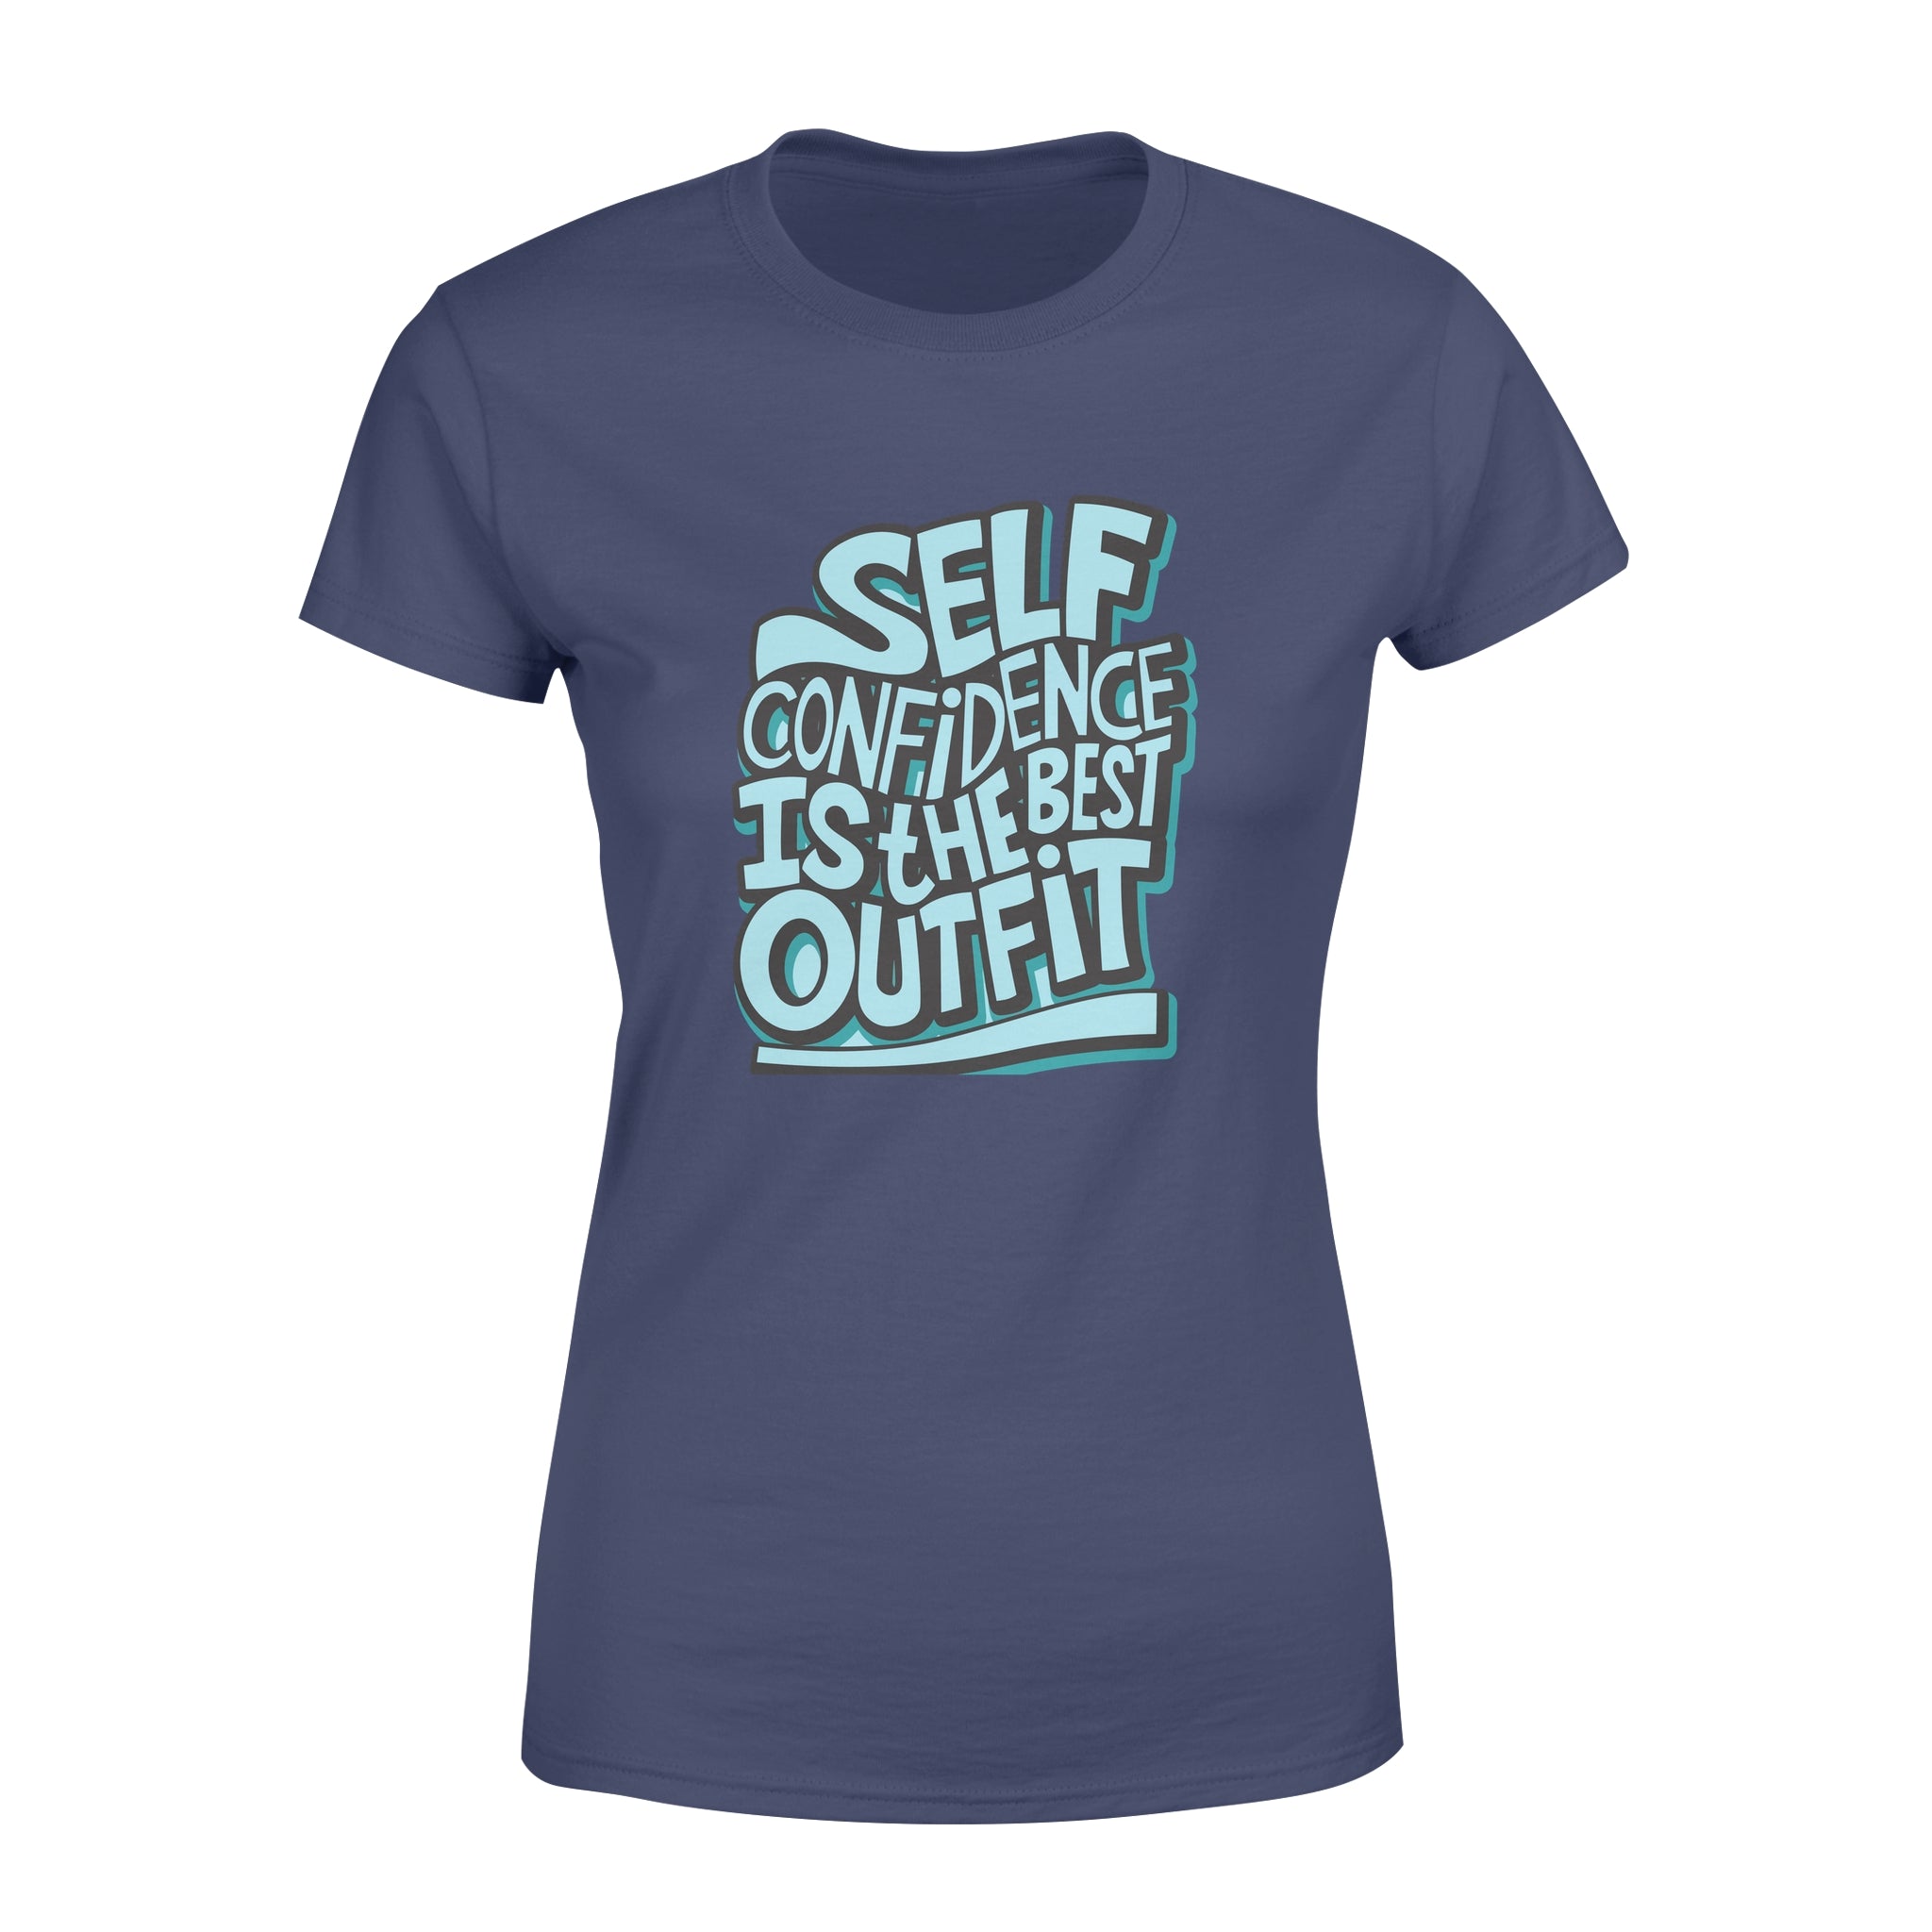 Self Confidence Is The Best Outfit -  Women's T-shirt